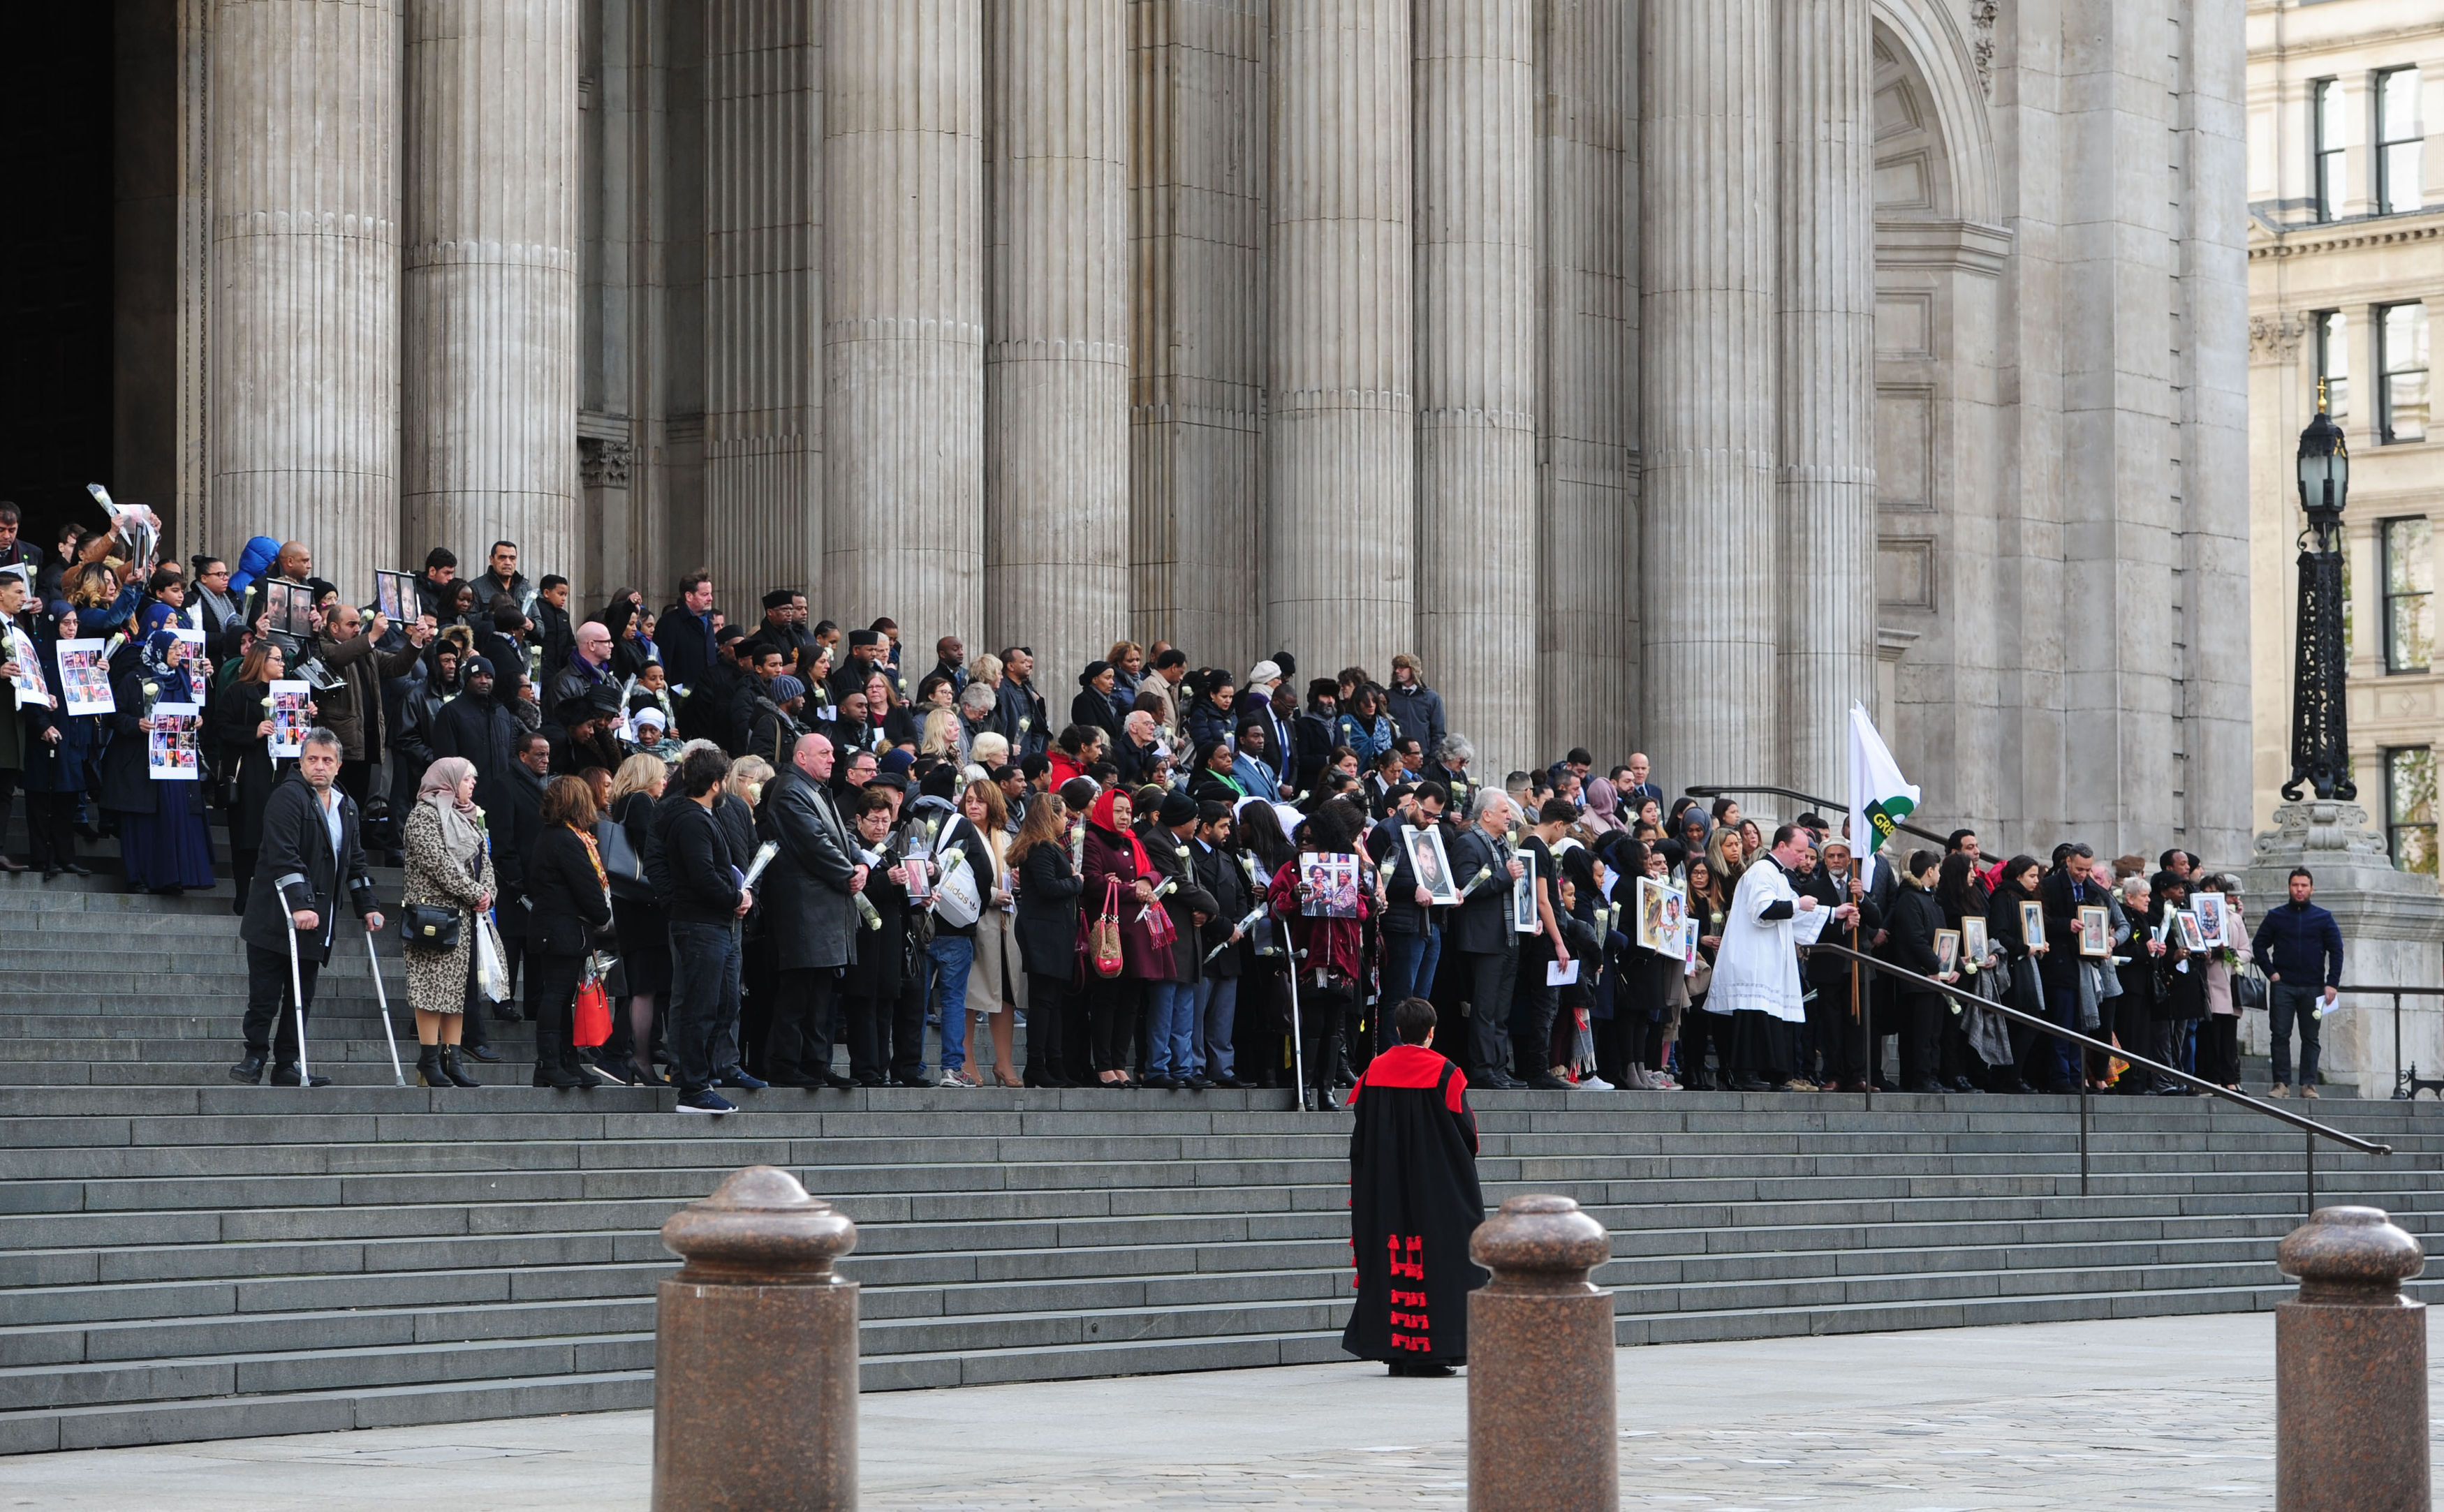 People gather on the steps as they leave after the service at St Paul's Cathedral